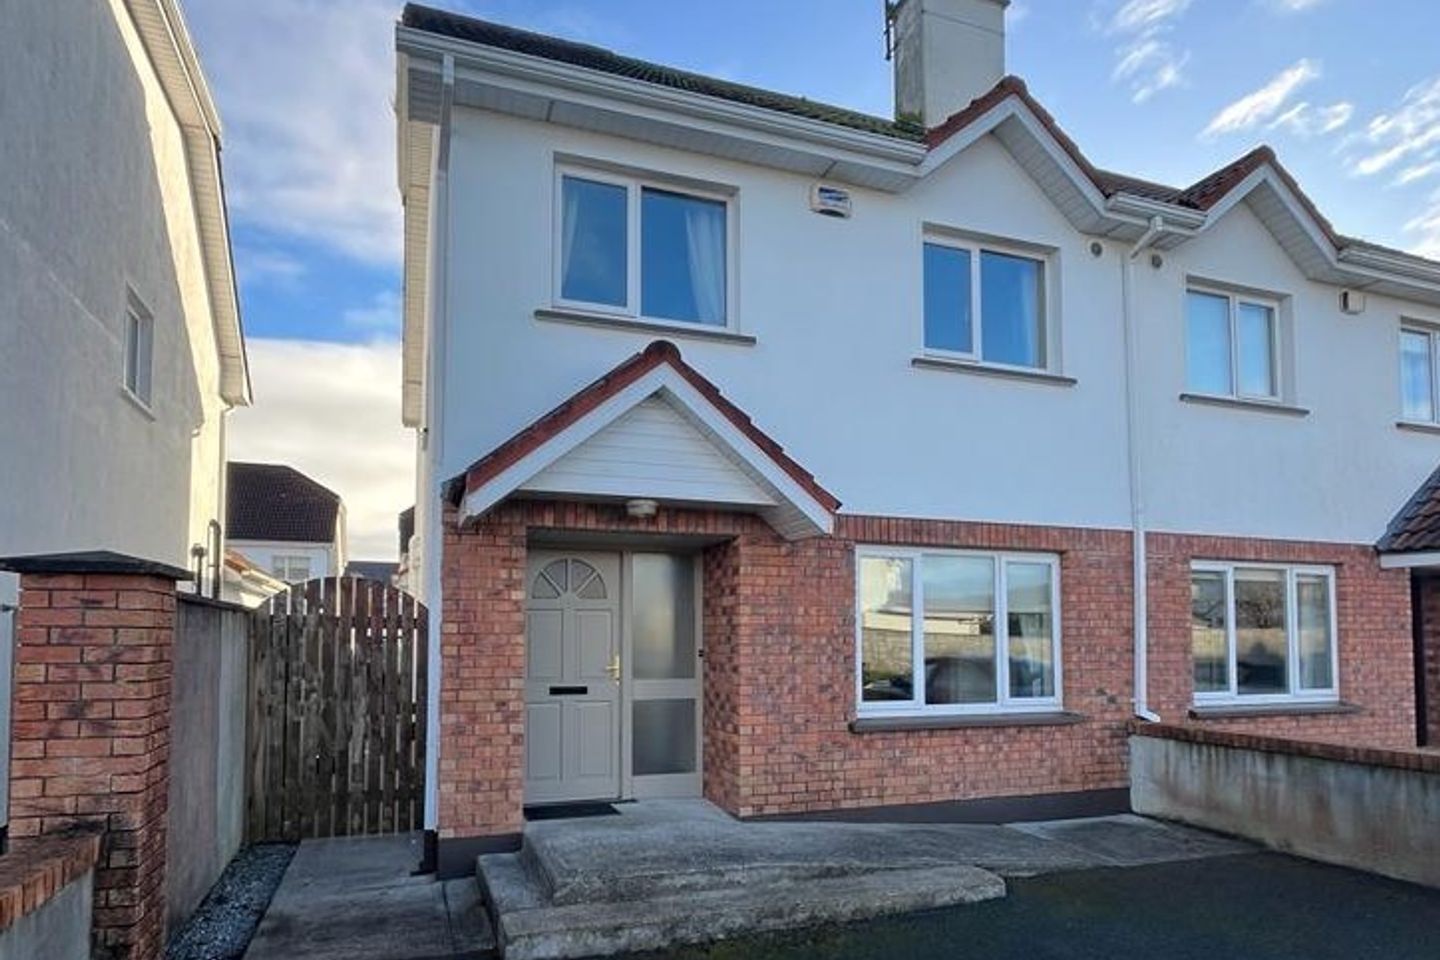 117 Woodfield, Galway Road, Tuam, Co. Galway, H54PE03